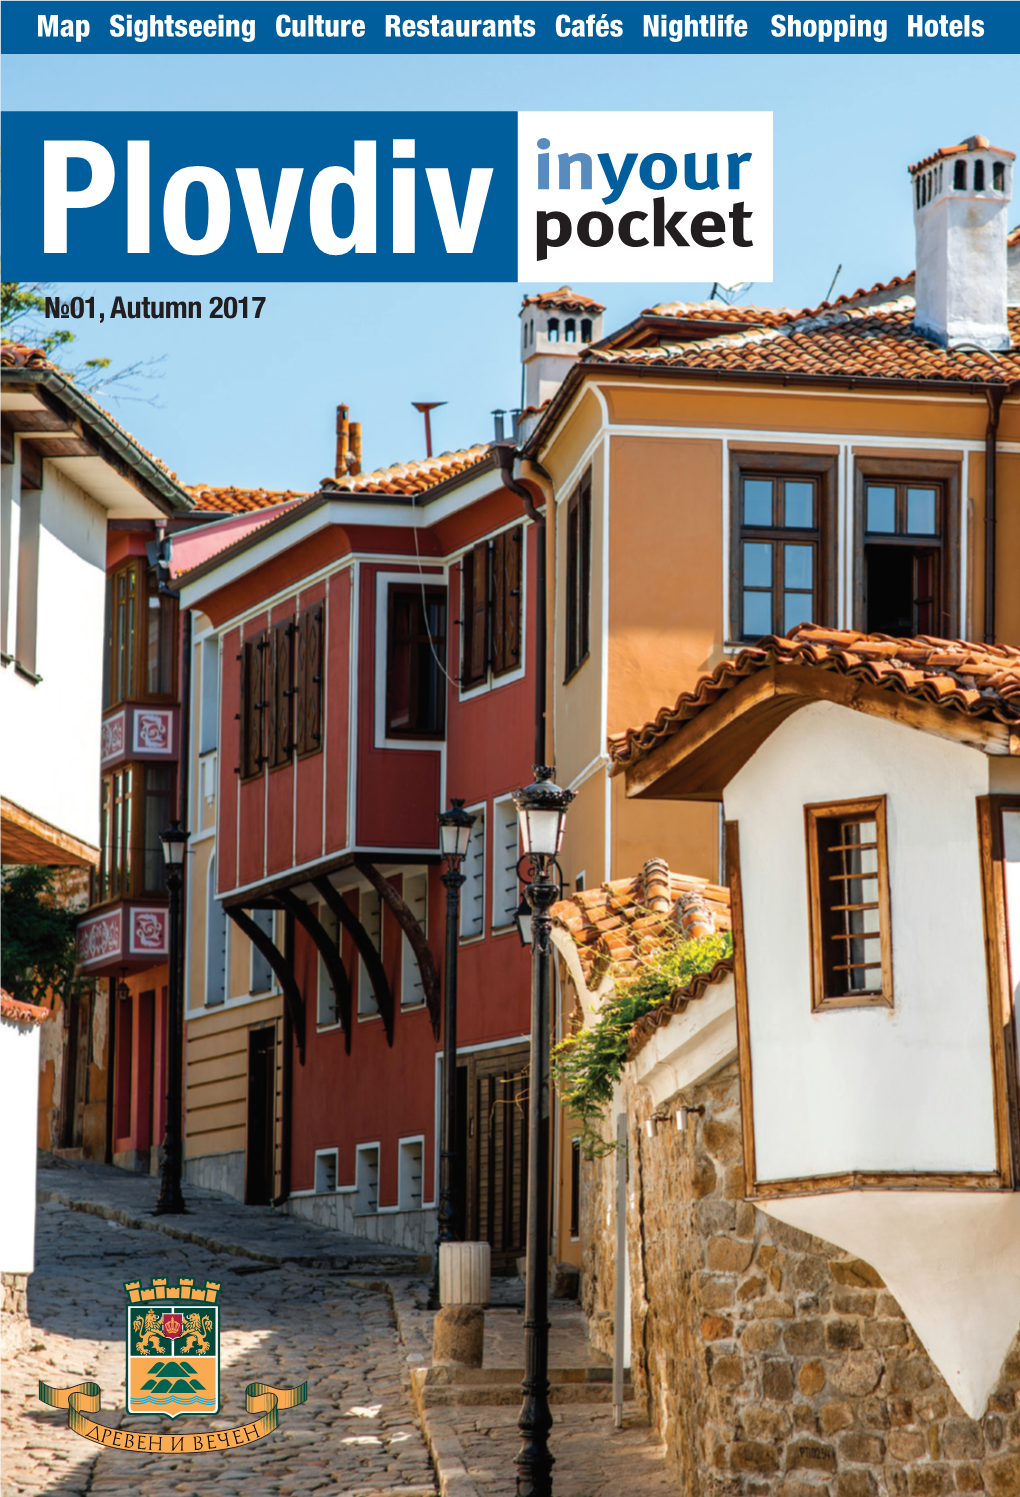 Download a Plovdiv Guide